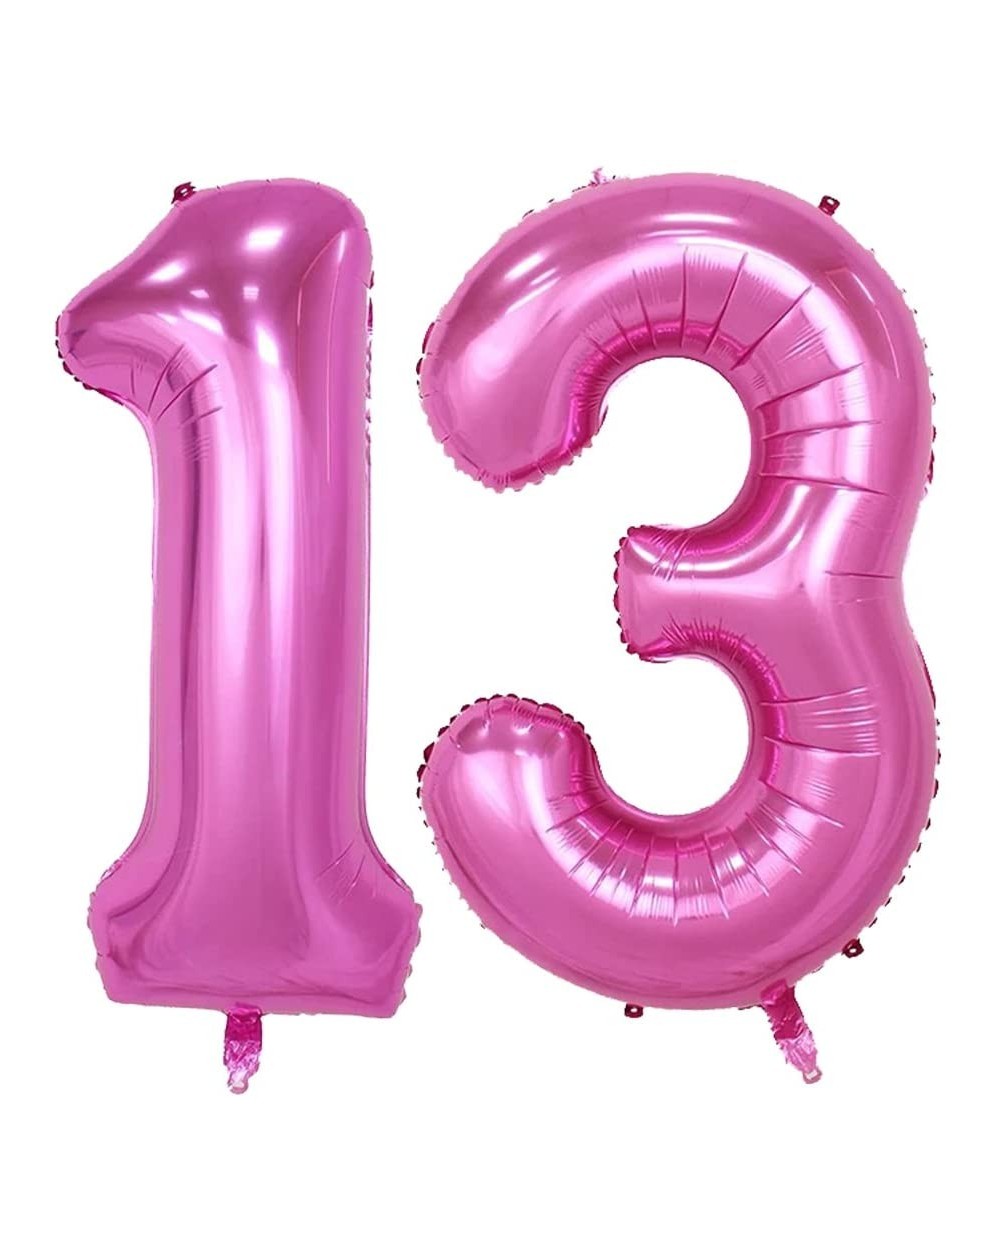 Balloons 40inch Pink Number 13 Jumbo foil Helium Balloons for Bithday Party Festival Decorations Photo Props (Pink 13) - Pink...